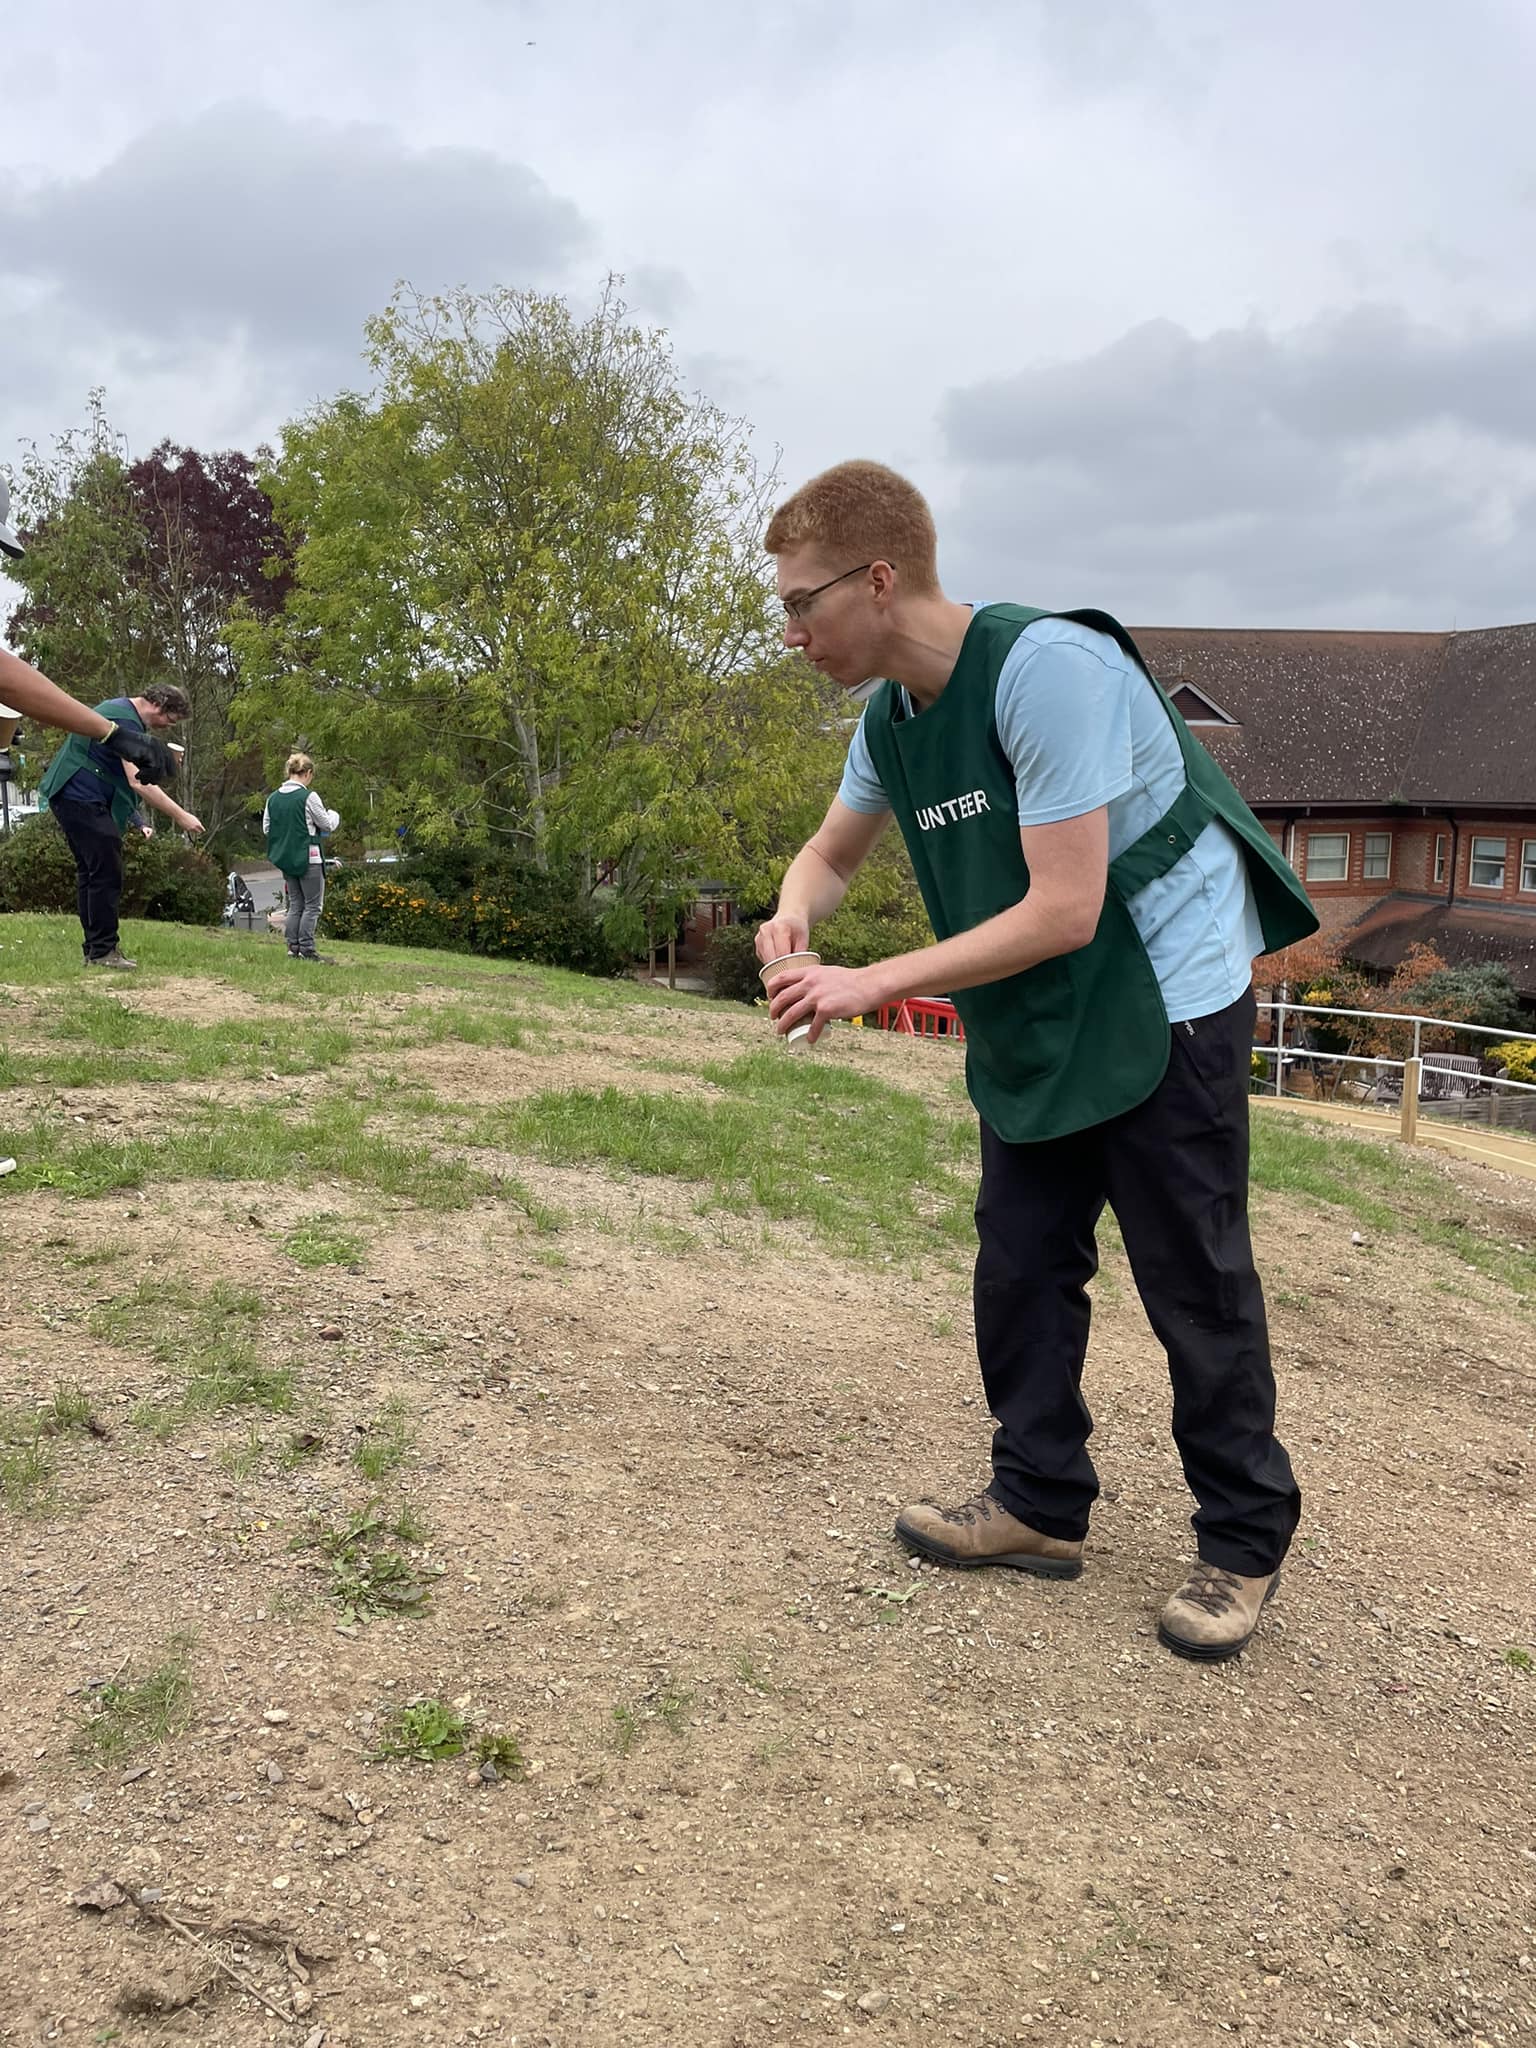 A volunteer in a green tabard spreading seeds over a lawn. More volunteers can been seen in the background doing the same.